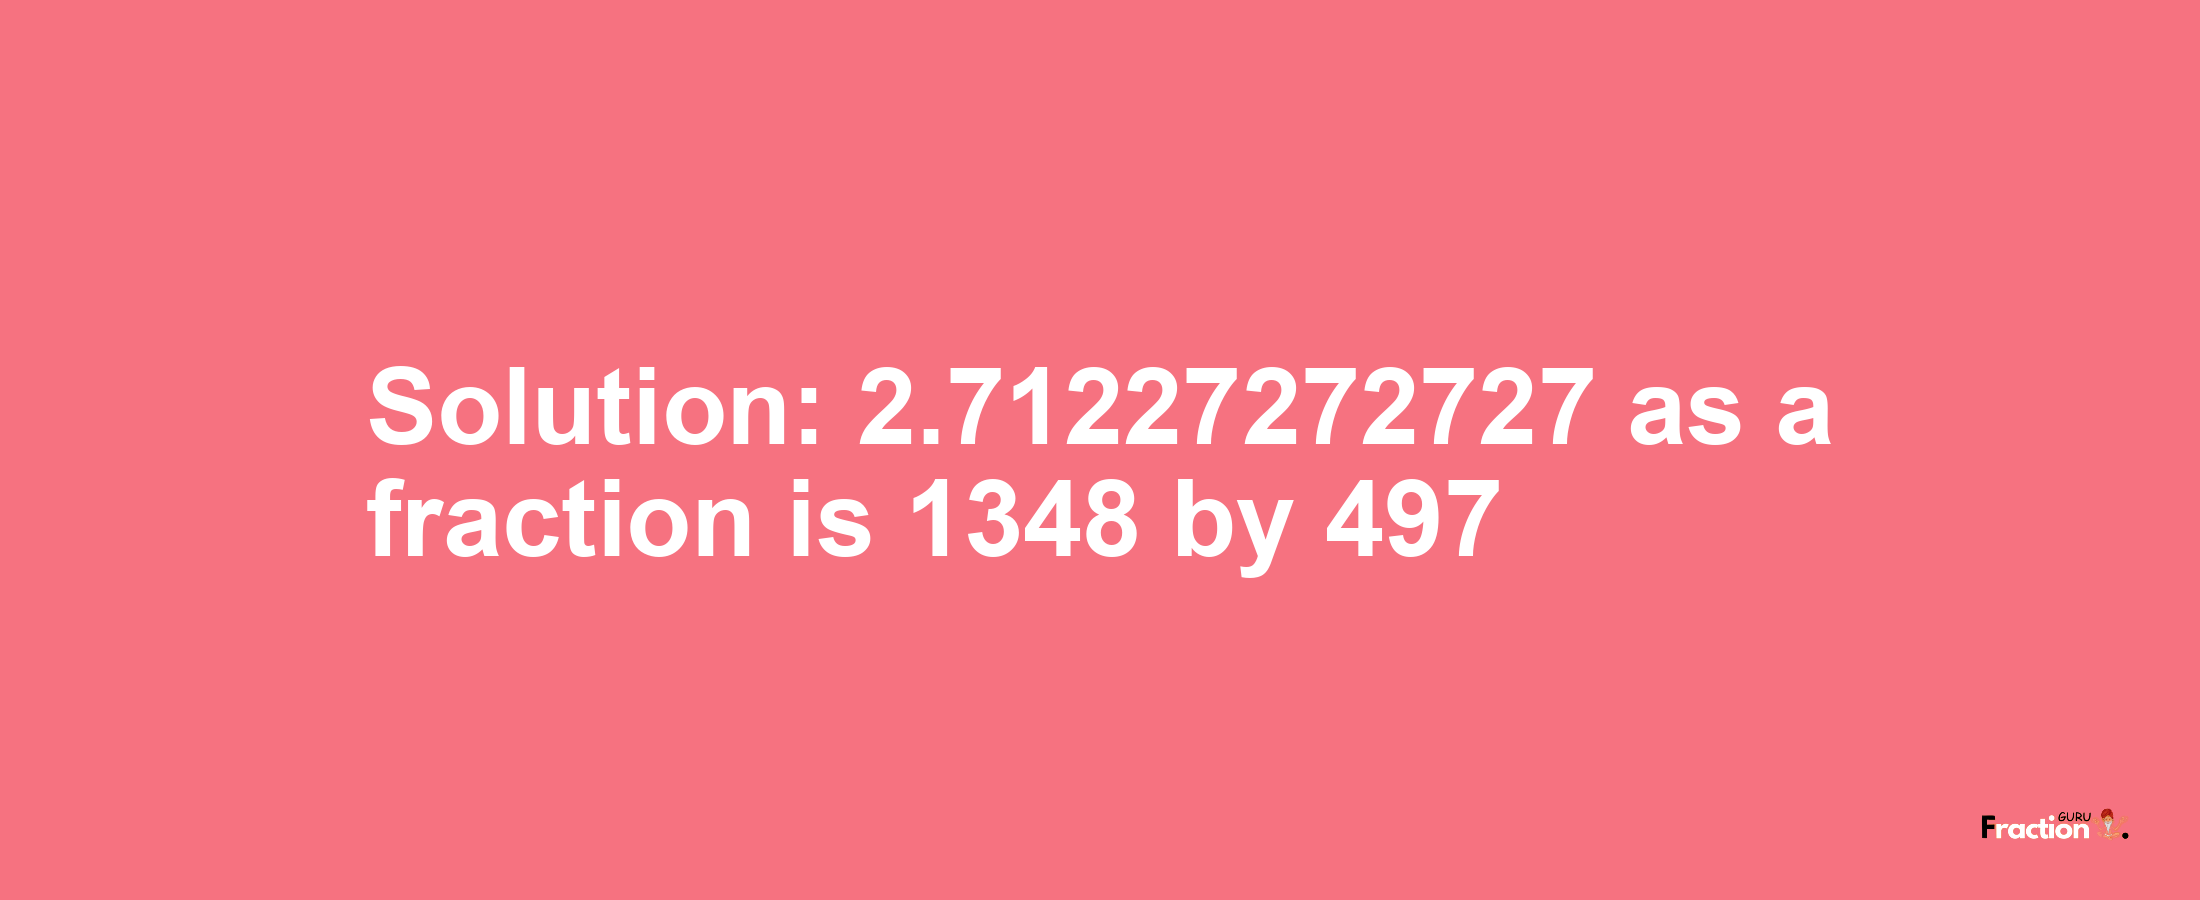 Solution:2.71227272727 as a fraction is 1348/497